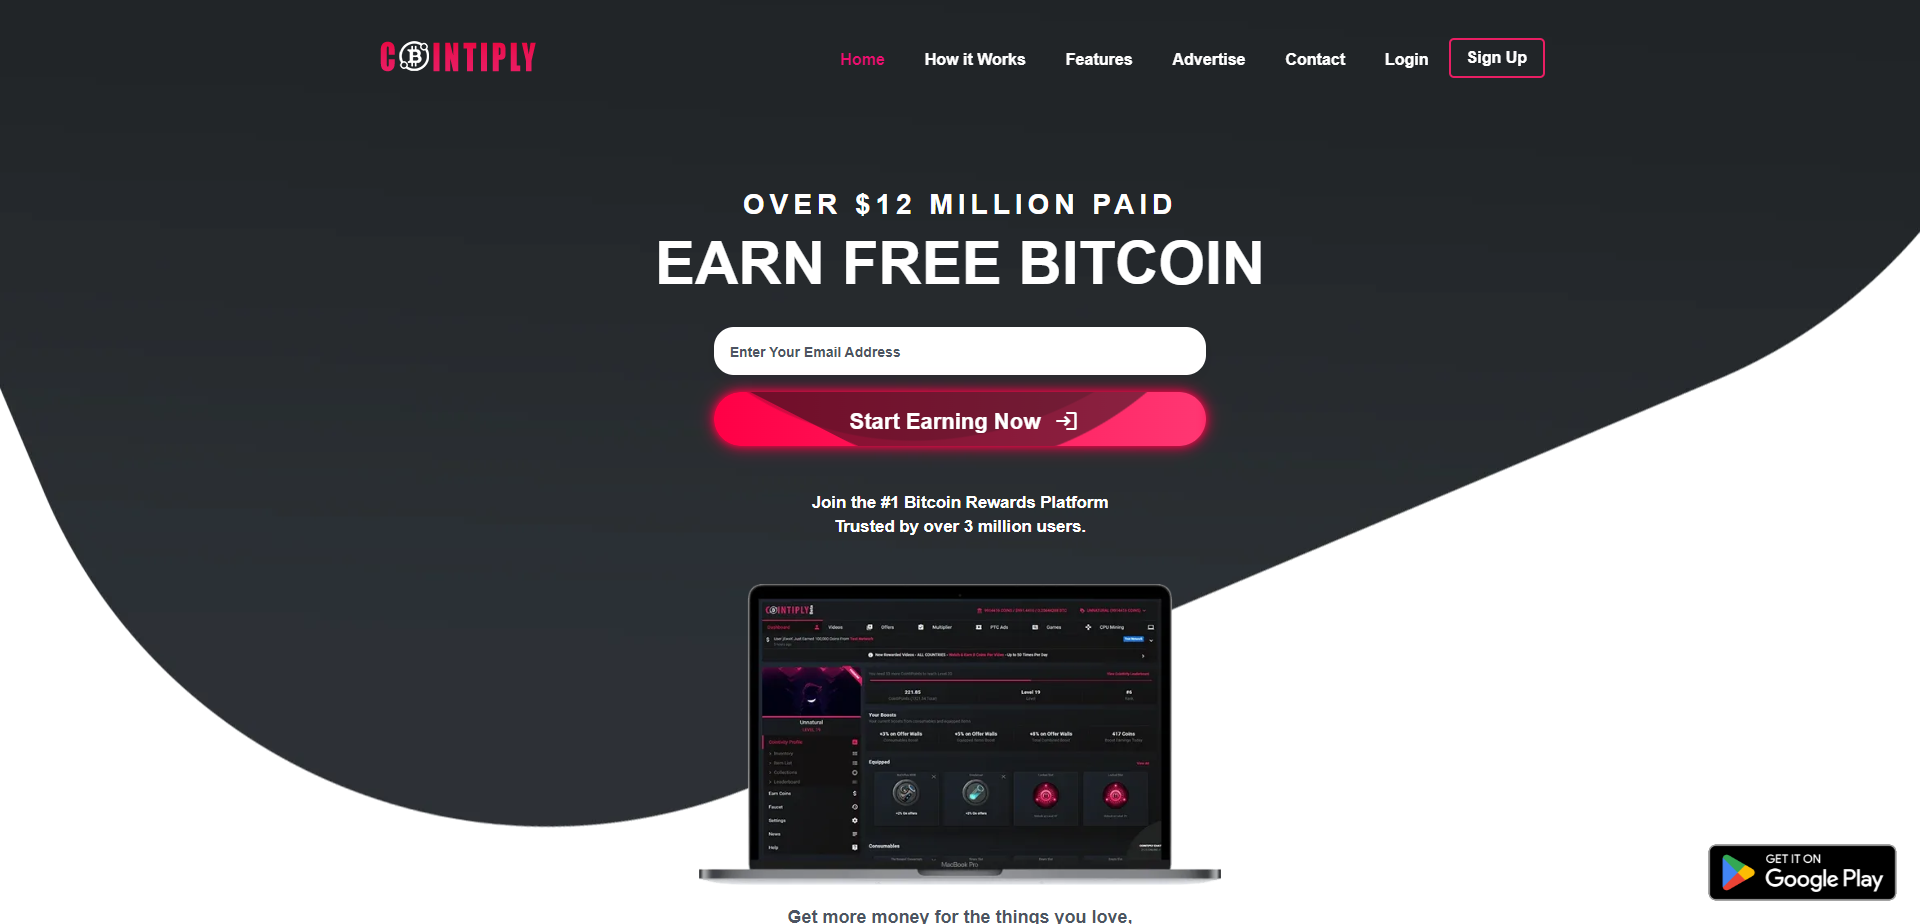 Landing Page for Cointiply